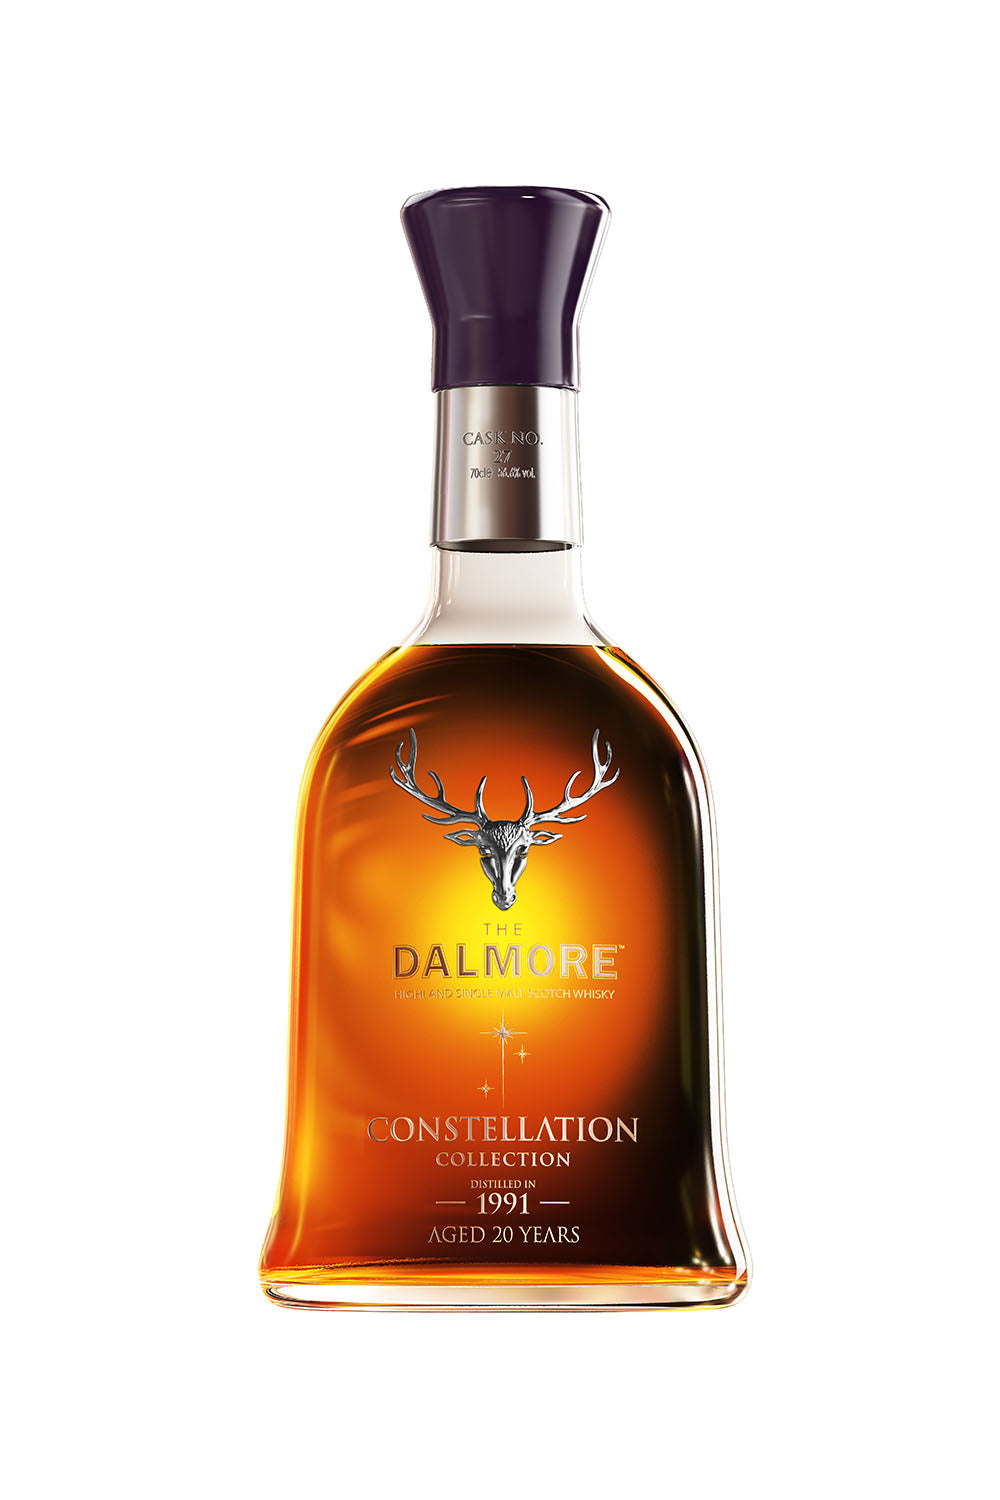 The Dalmore 1991 Constellation - Cask 27